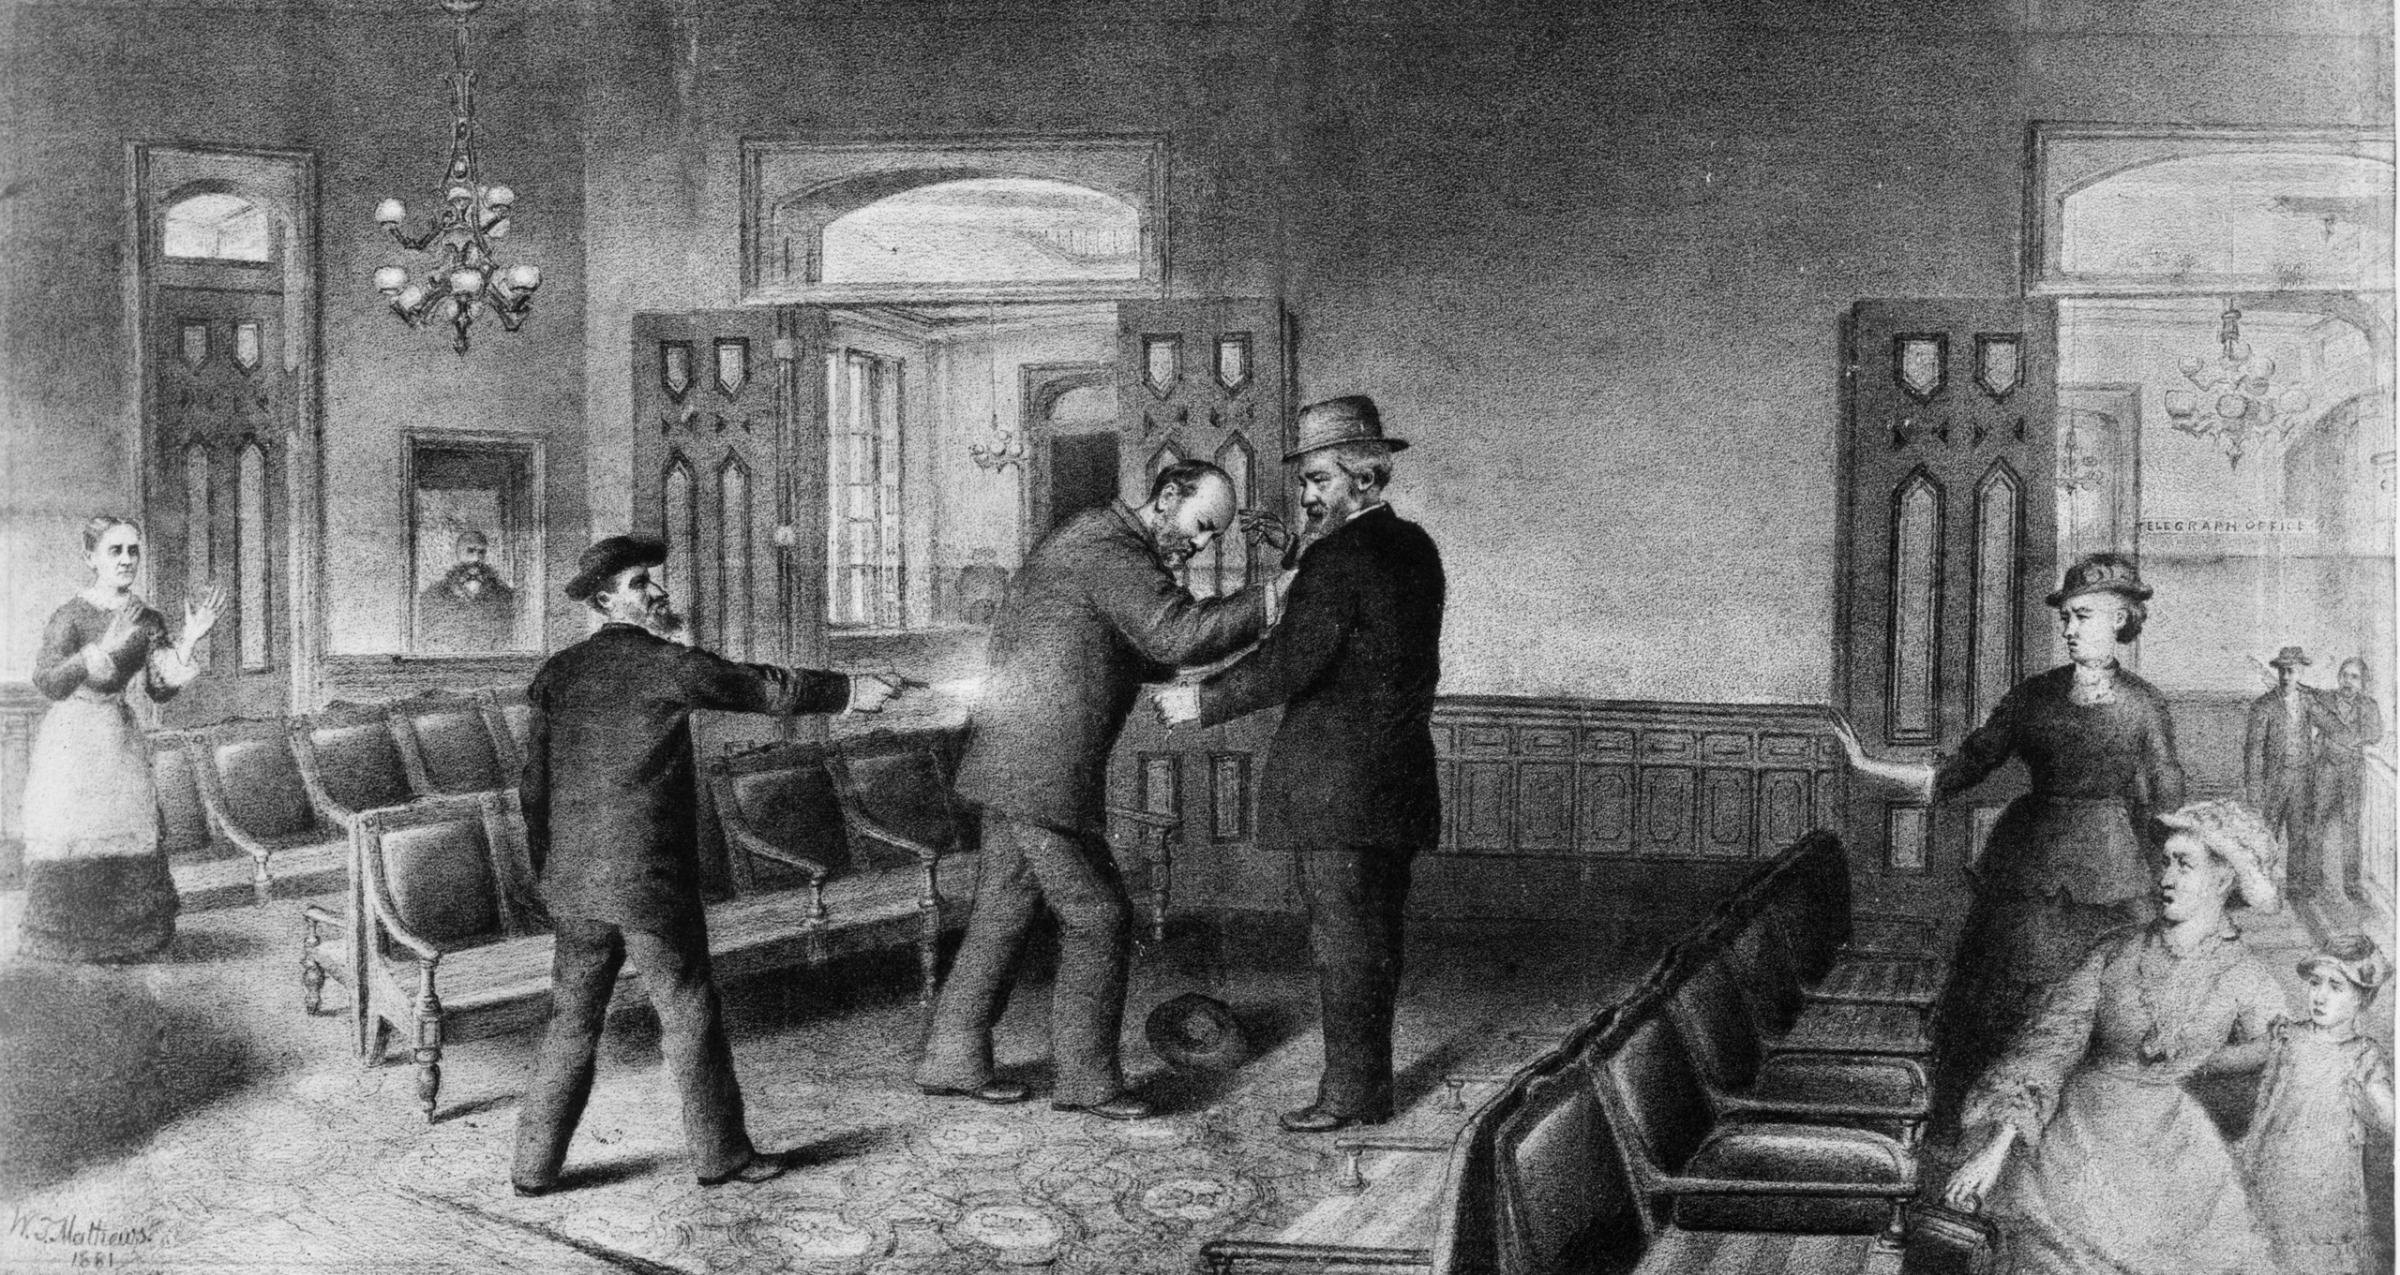 Charles Jules Guiteau, a disillusioned office seeker shoots US president James Garfield in the back at the Baltimore and Potomac Railroad Depot, Washington, DC. Garfield finally died of his injuries on September 19th, 1881. Original Artist: By William T Mathews.